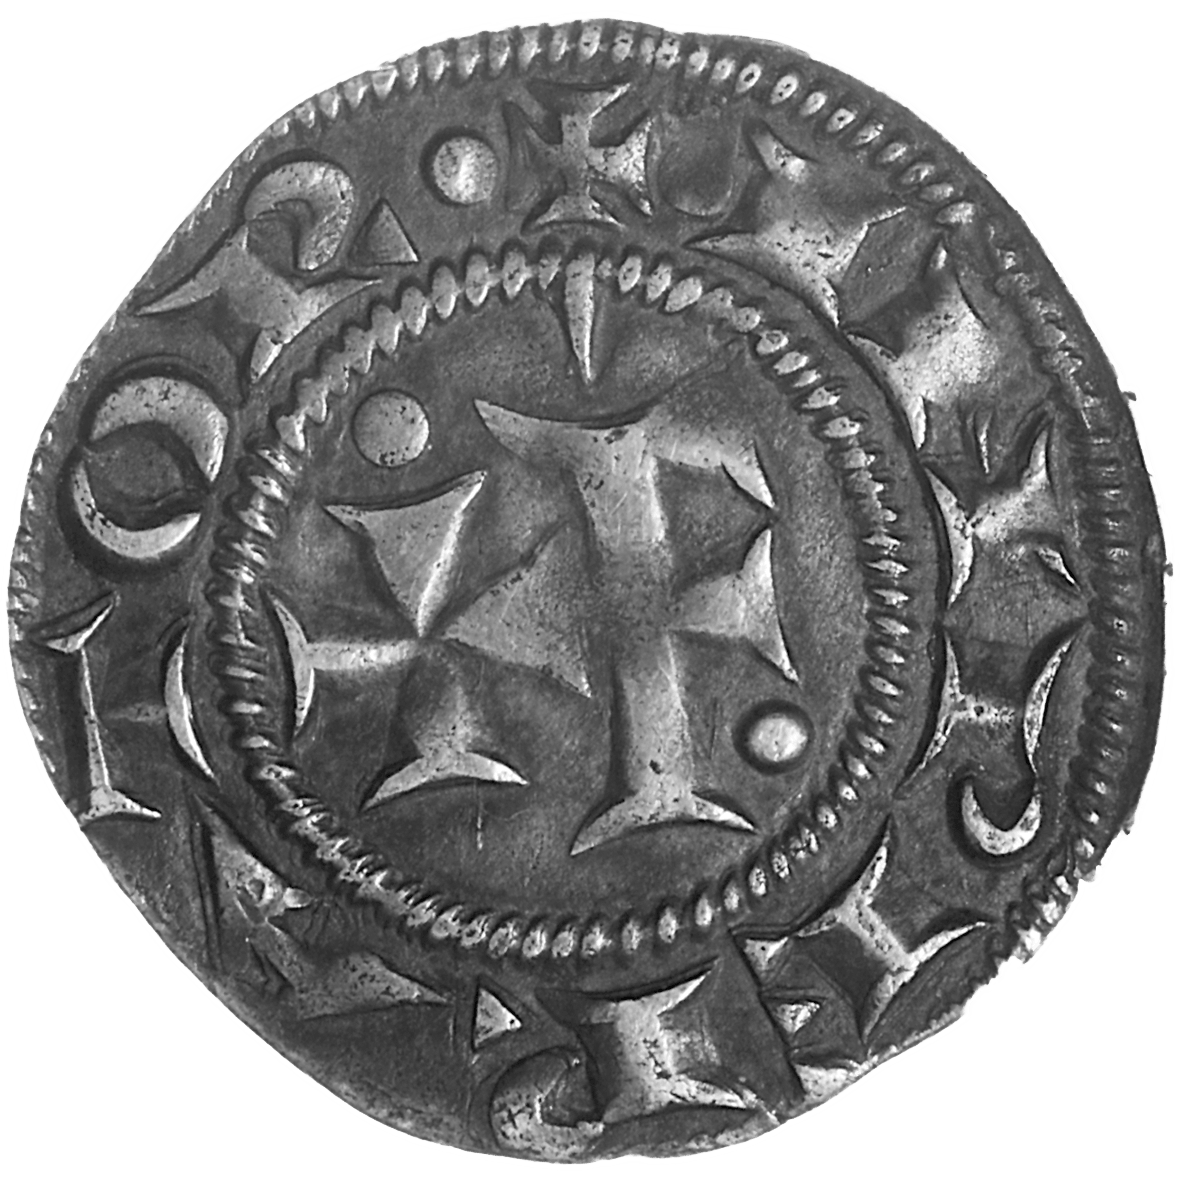 Holy Roman Empire, Archdiocese of Trento, Egnone d'Appiano, Grosso (reverse)